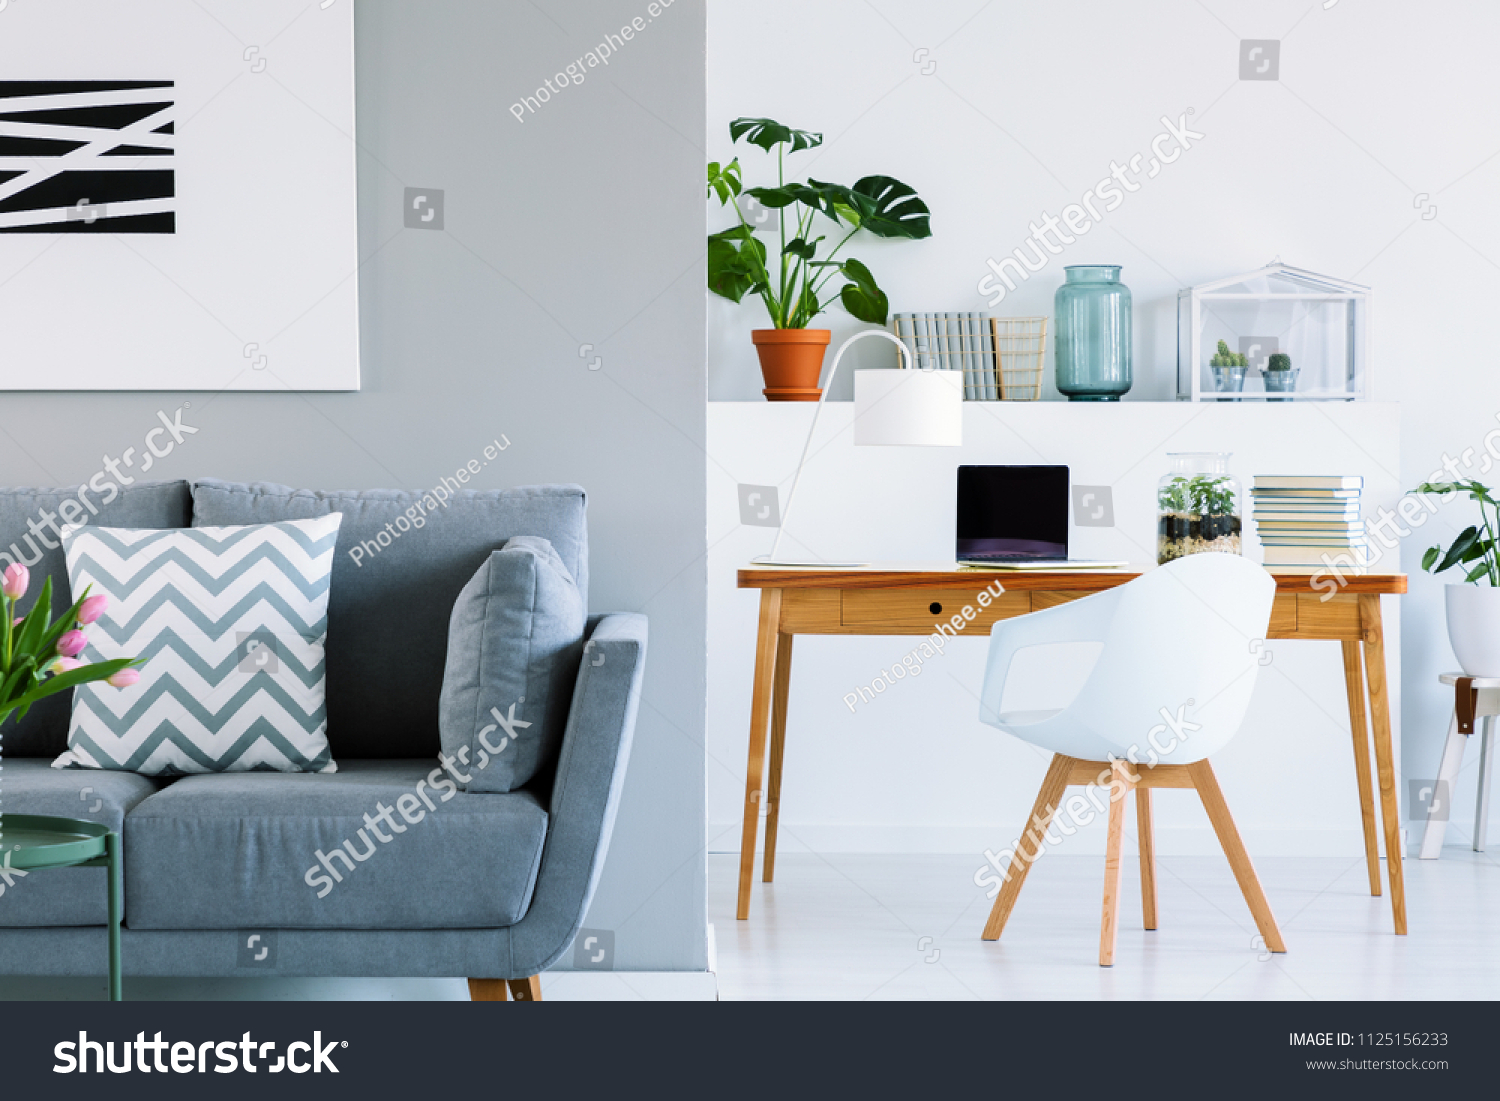 Patterned cushion on grey sofa in scandinavian home office interior with chair at desk. Real photo #1125156233